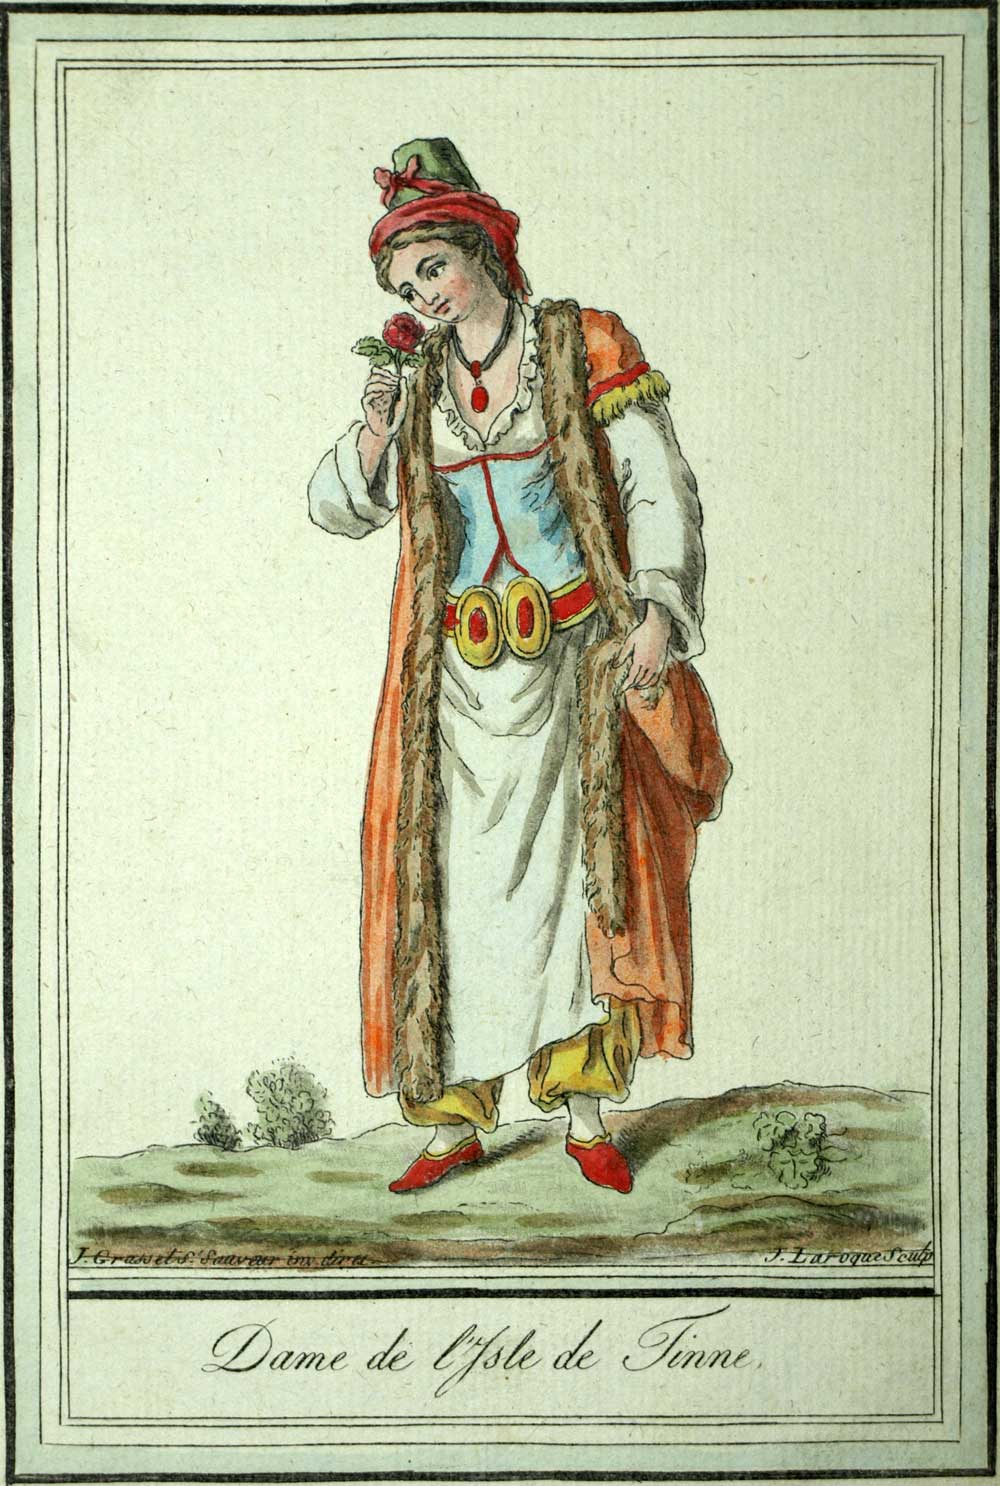 LADY OF THE ISLE OF FINNE (Ireland) engraving illustration by Grasset 1797 